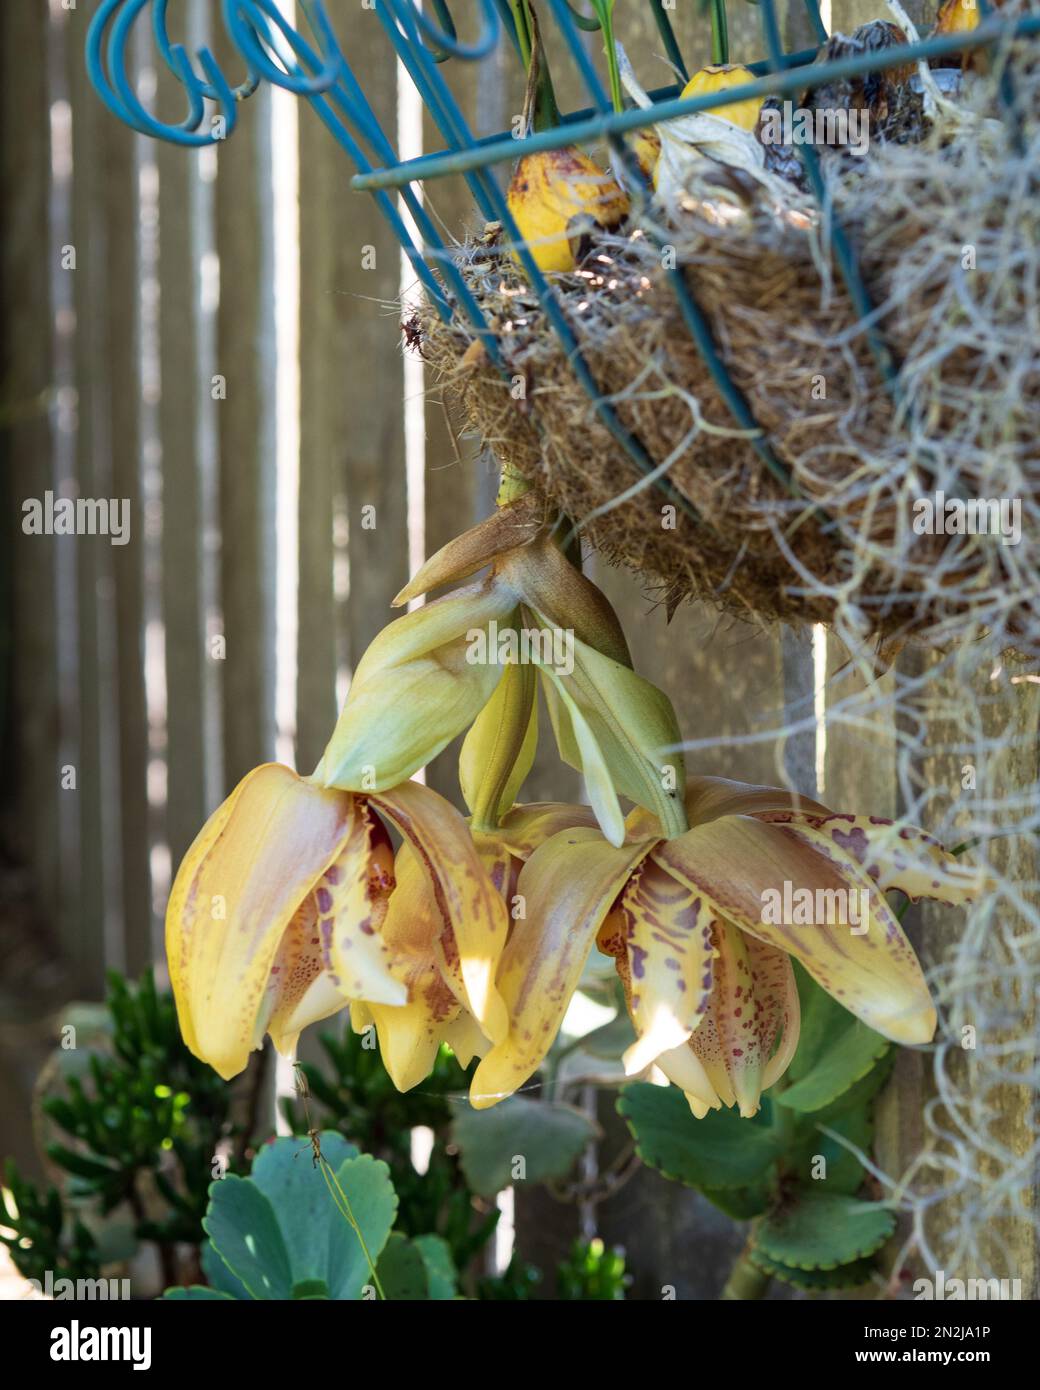 Upside down Orchid flowers, Stanhopea orchids in bloom, growing downwards from a hanging basket Stock Photo